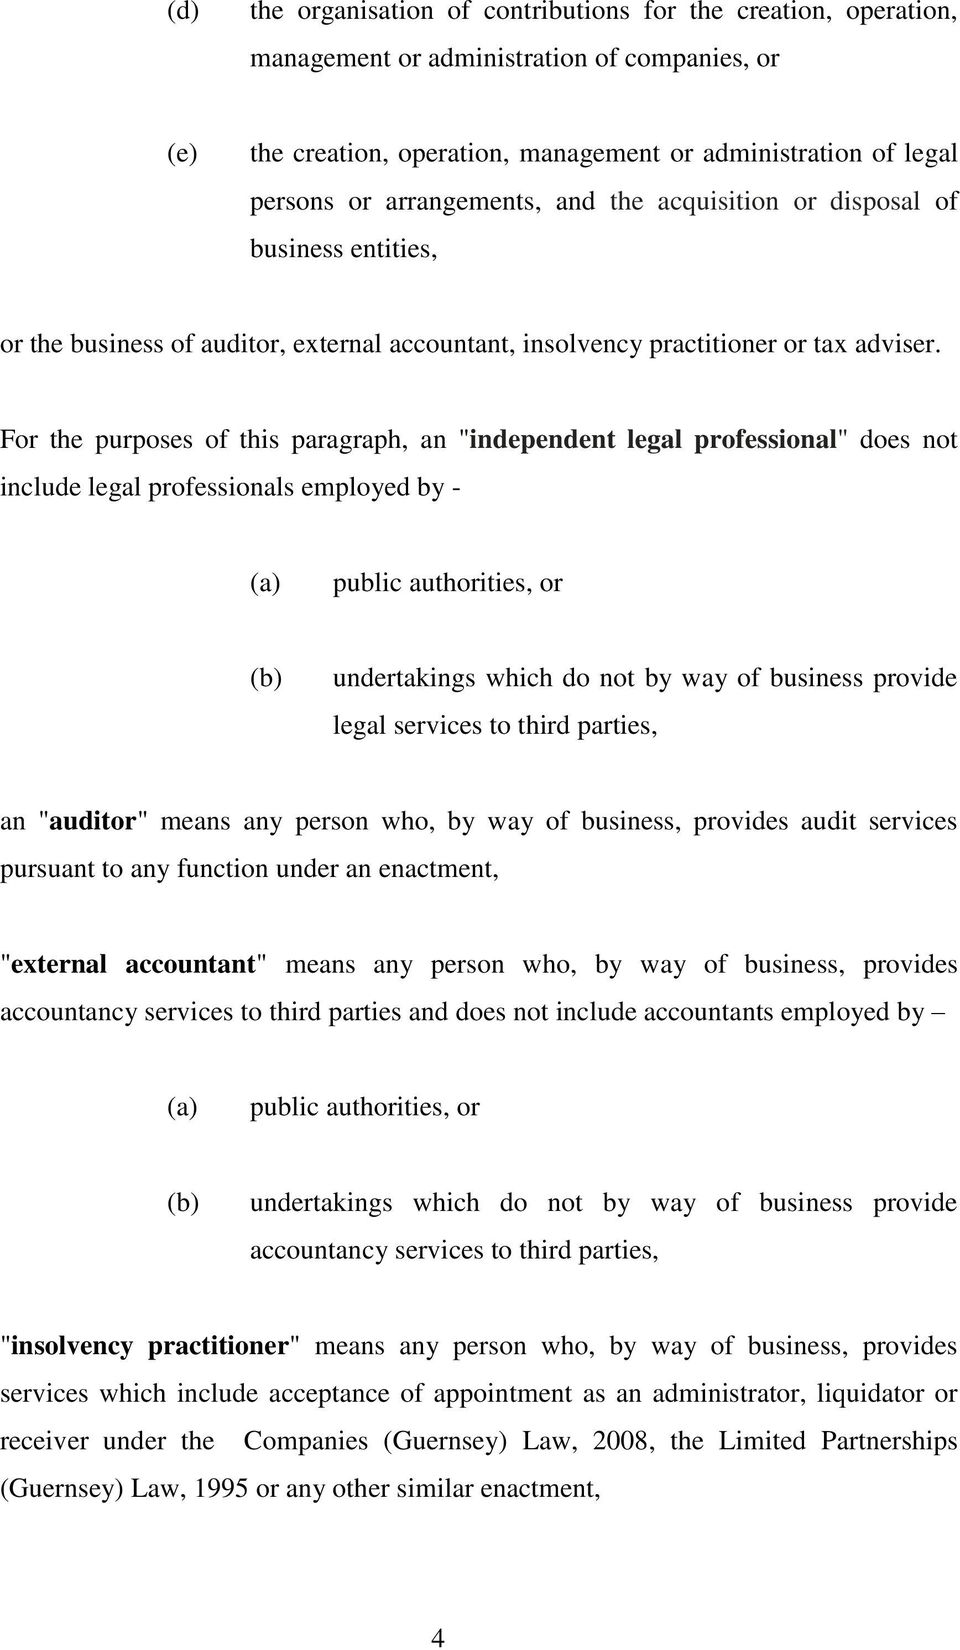 For the purposes of this paragraph, an "independent legal professional" does not include legal professionals employed by - public authorities, or undertakings which do not by way of business provide